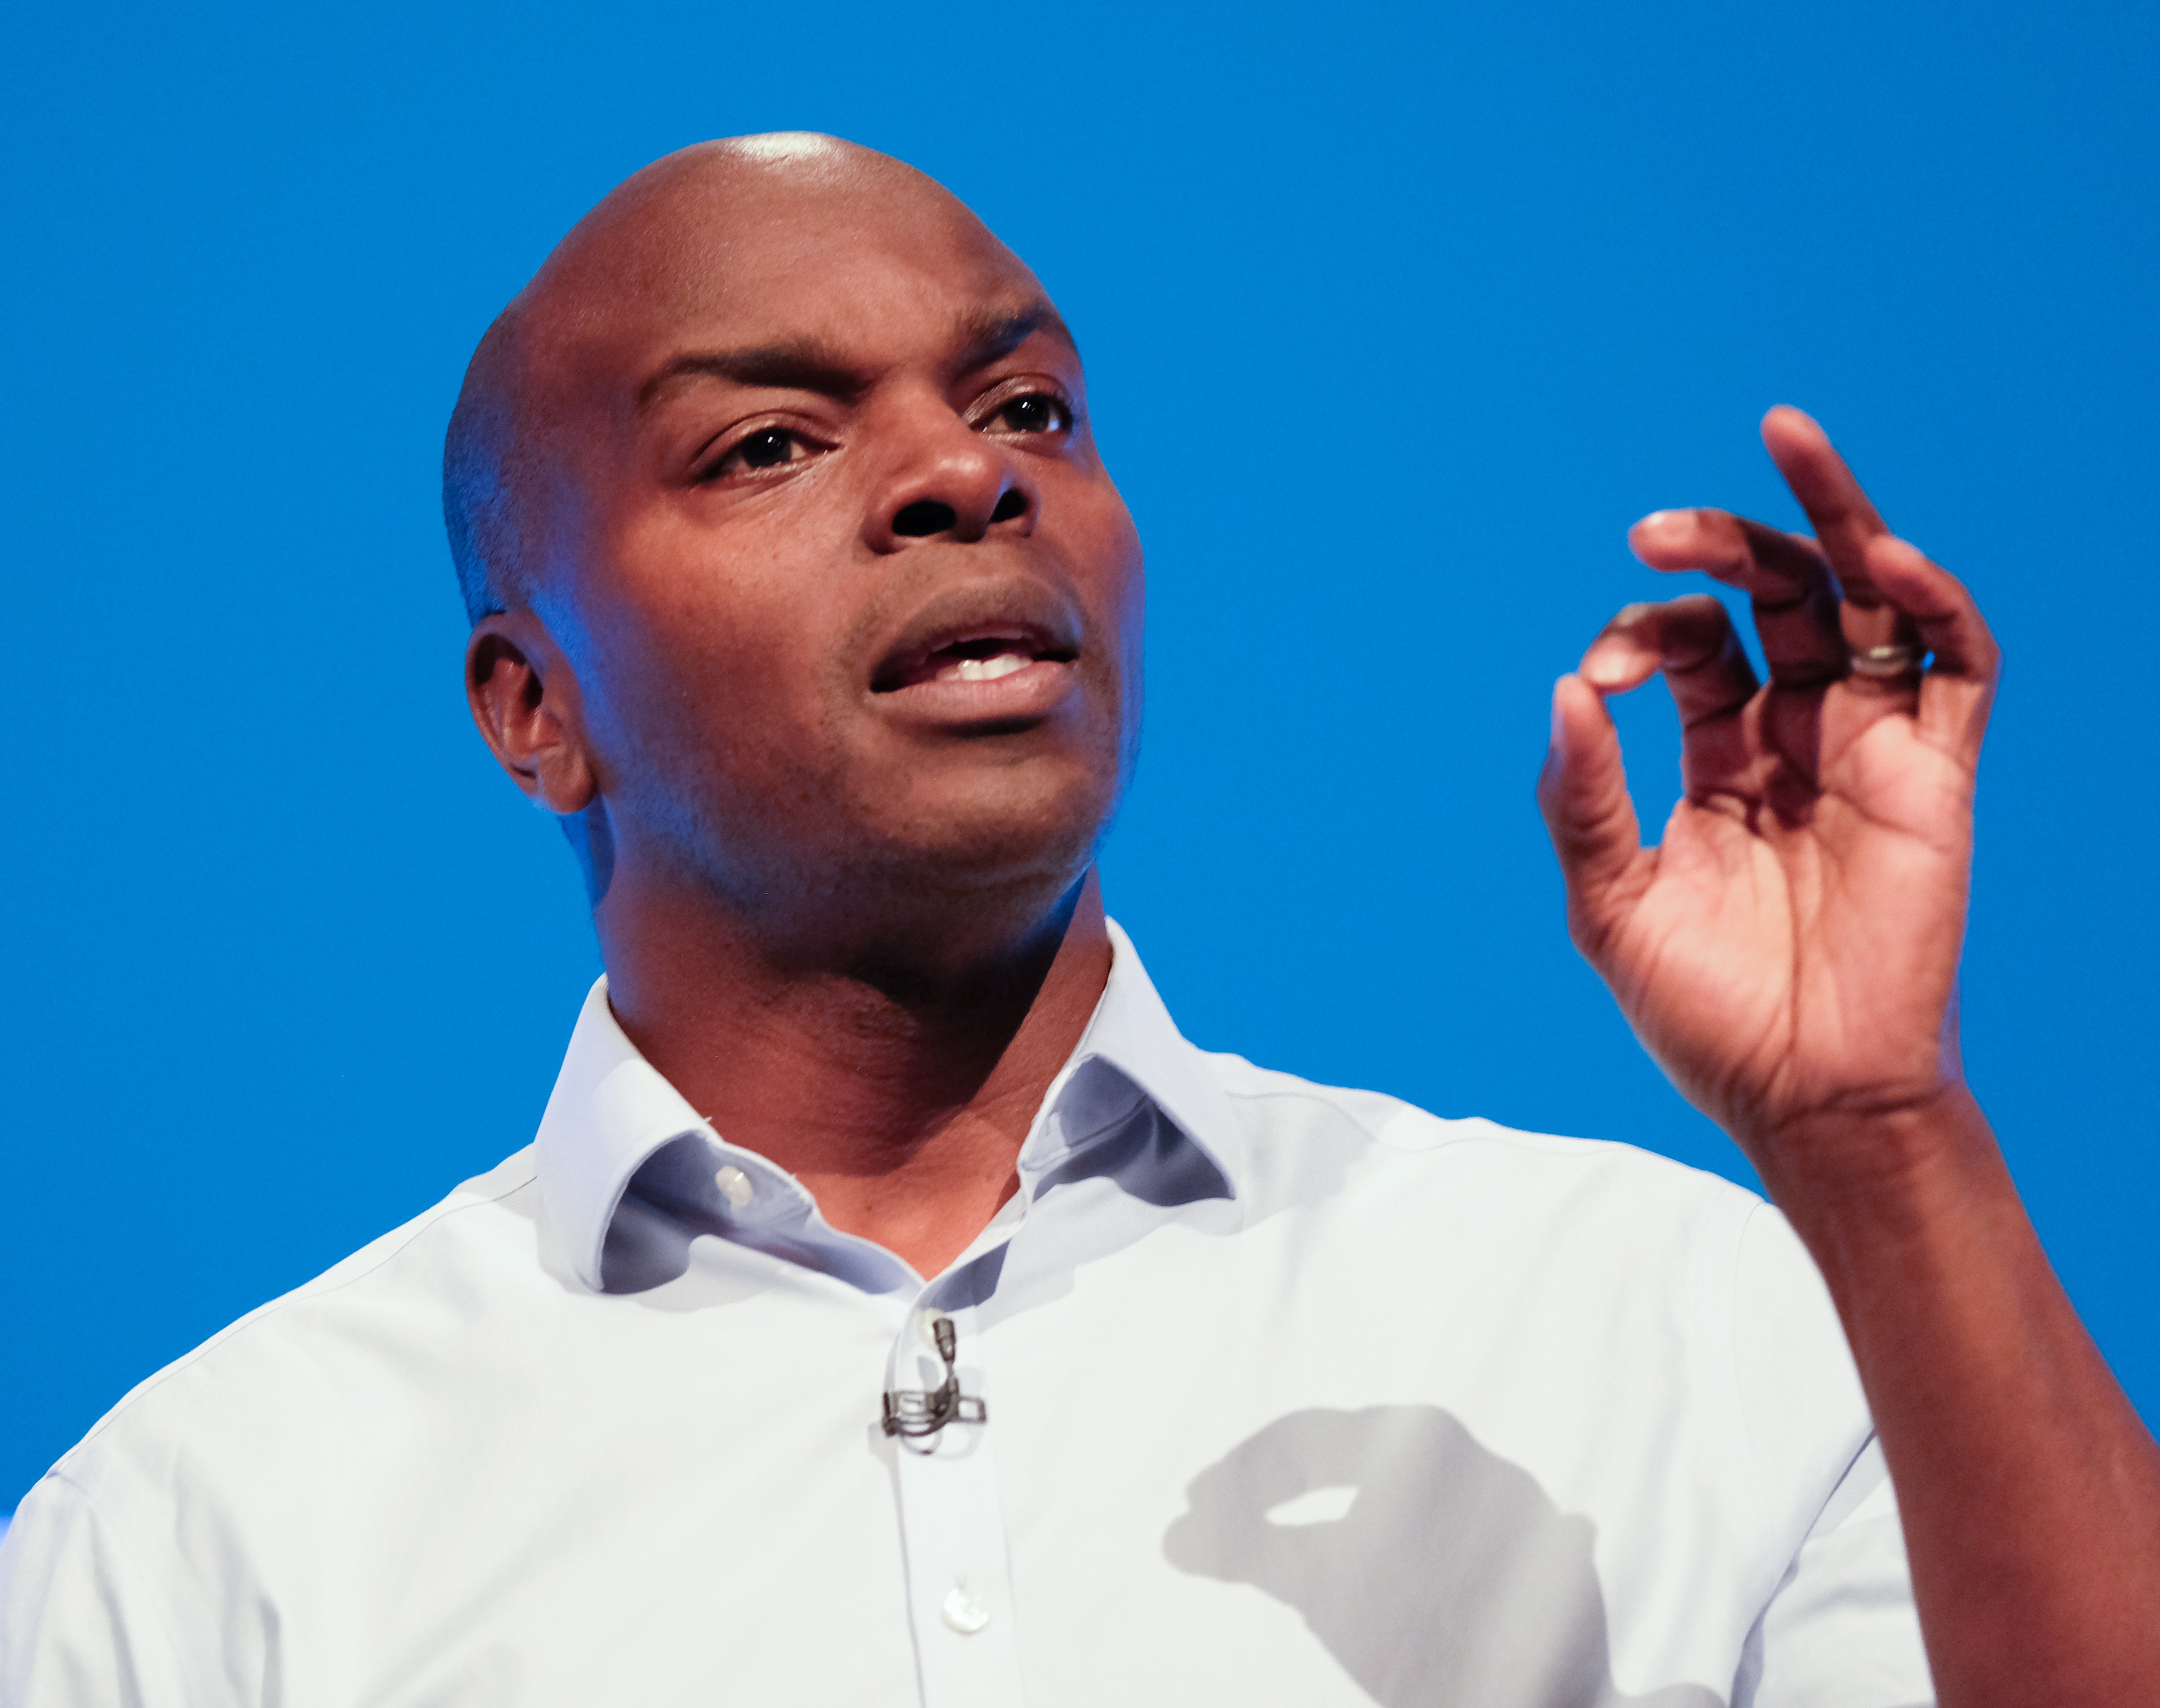 Shaun Bailey, the Conservative candidate for the Mayor of London, delivers a speech on the third day of the Conservative Party Conference at Manchester Central at Manchester Central on 01 October, 2019 in Manchester, England. Mr Bailey is facing criticism after suggesting people living in temporary accommodations should be able to save up for a housing deposit.